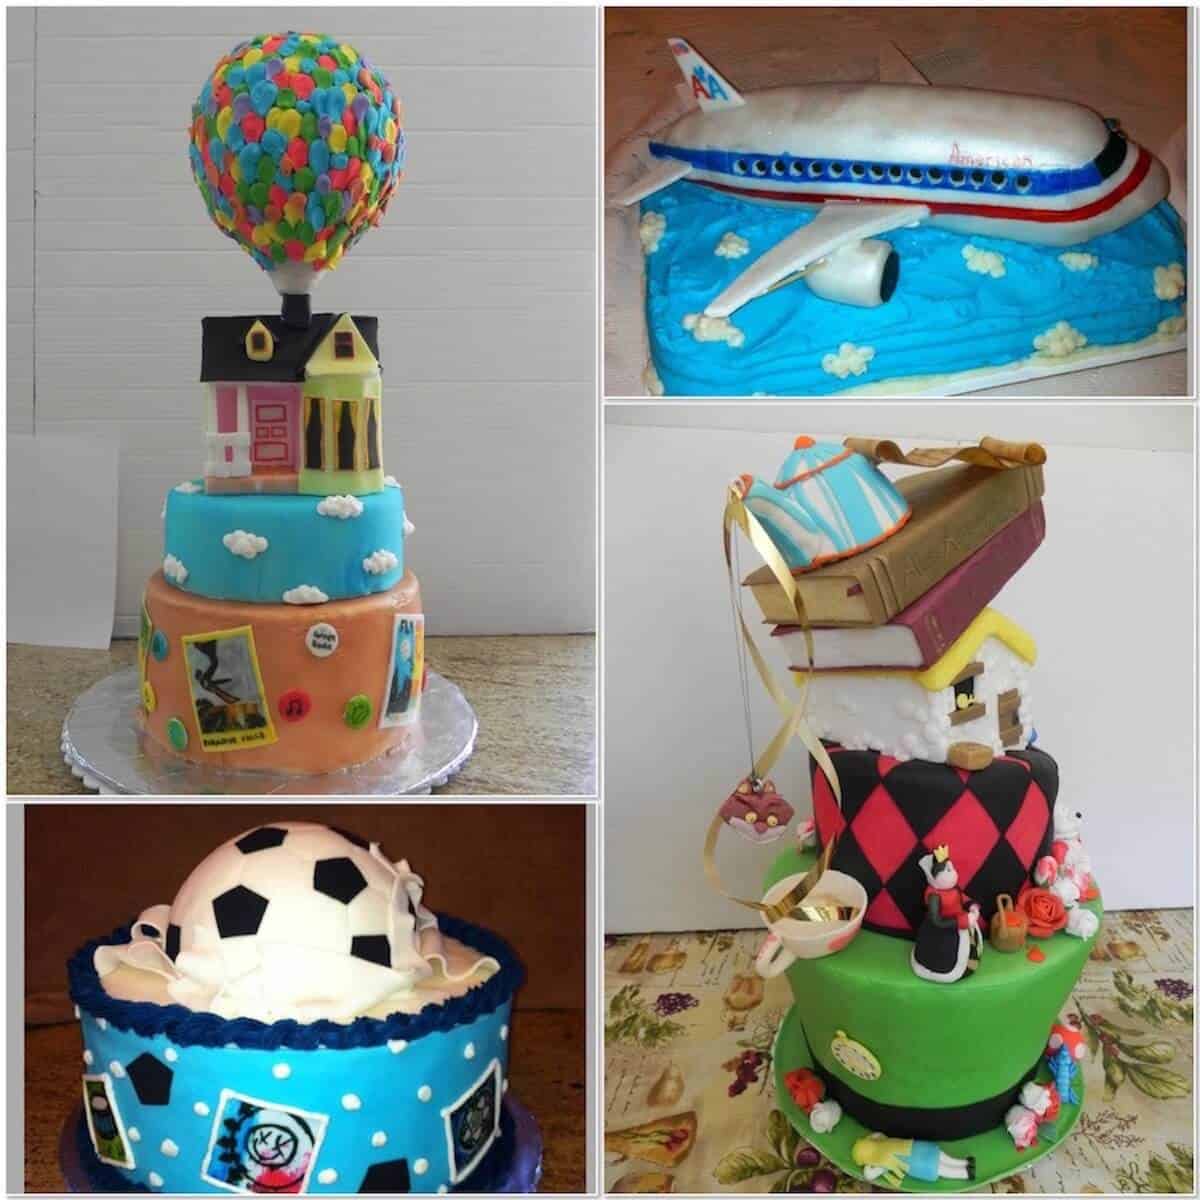 Collage of examples of sculpted cakes: the house from Up, a 787 airplane, a soccer ball, and scenes from Alice in Wonderland.